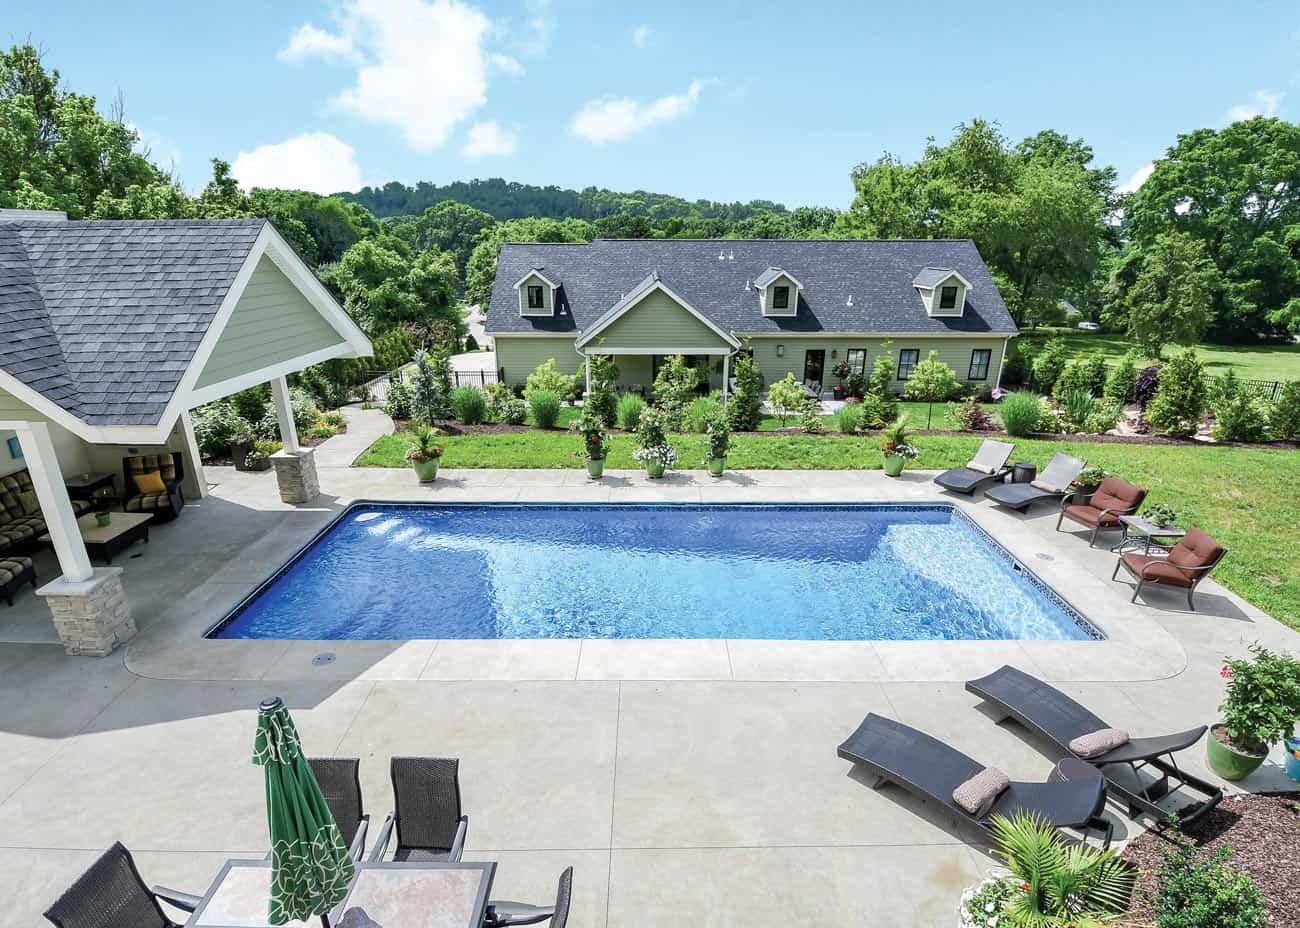 An arial view shows a pristine, rectangular in-ground pool in the backyard of a lovely home. Regular pool maintenance keeps the pool in pristine condition.